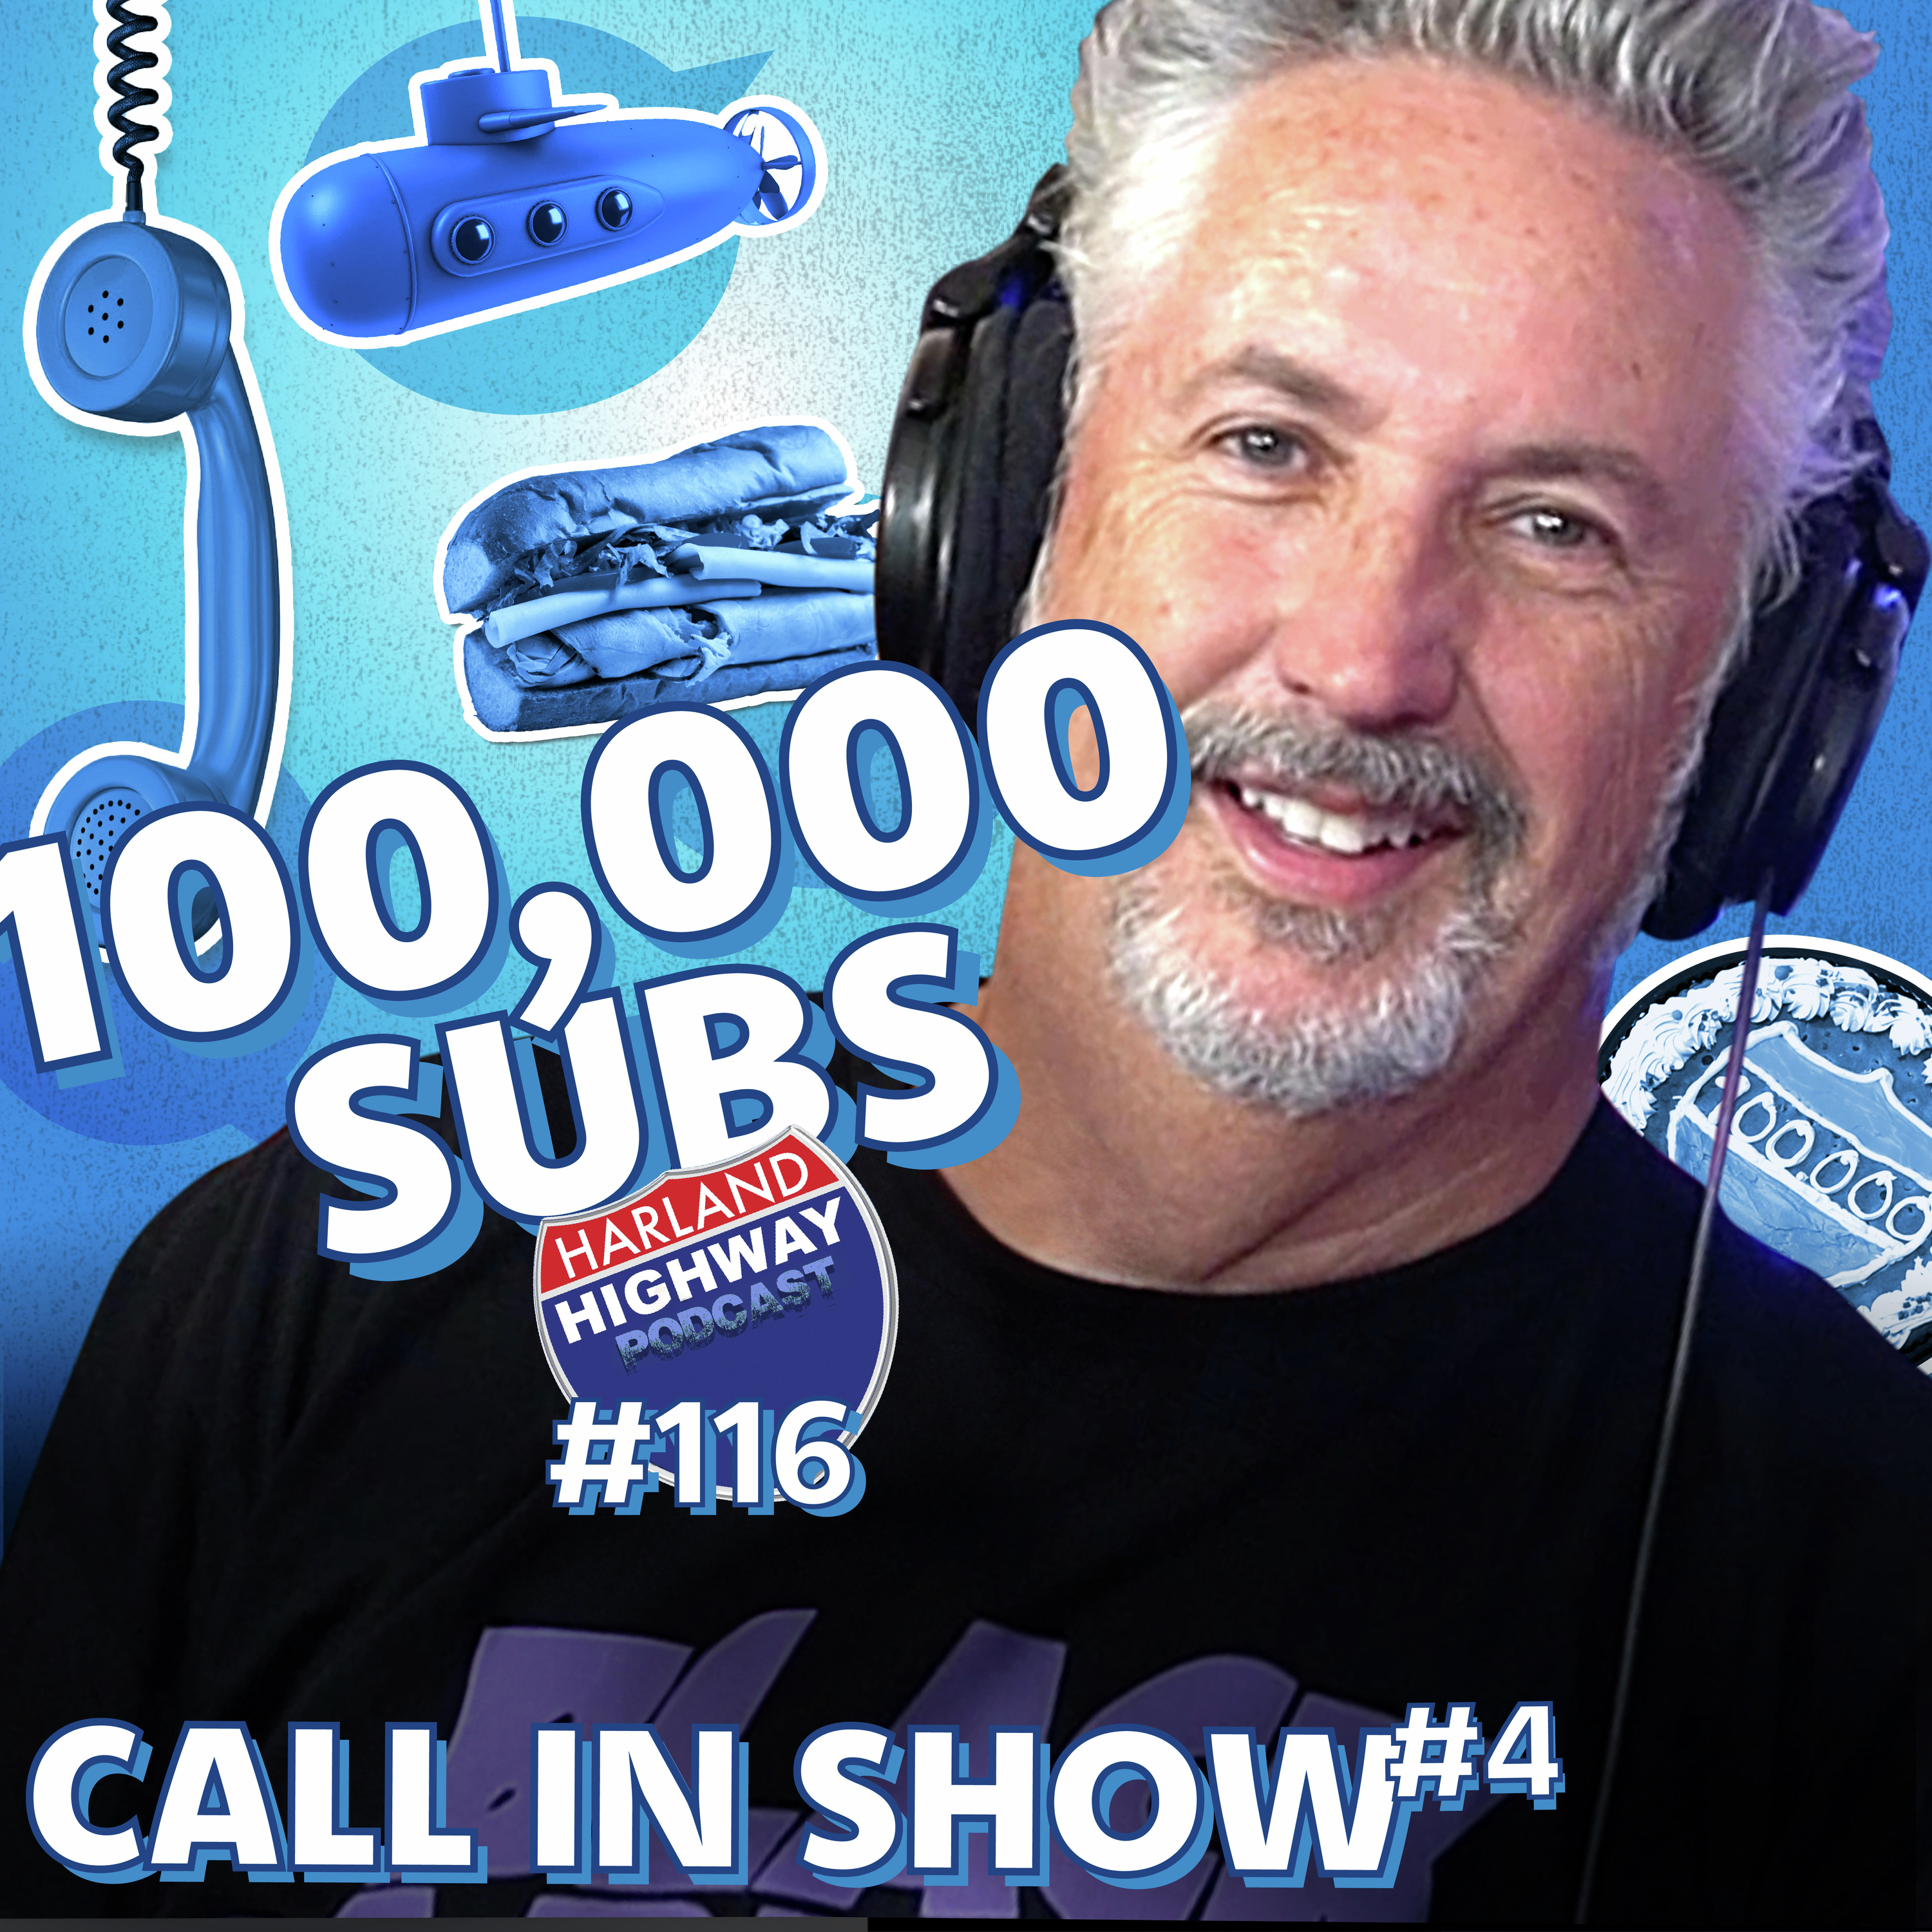 100,000 Subscribers CALL IN SHOW- We celebrate all you subscribers and take calls!